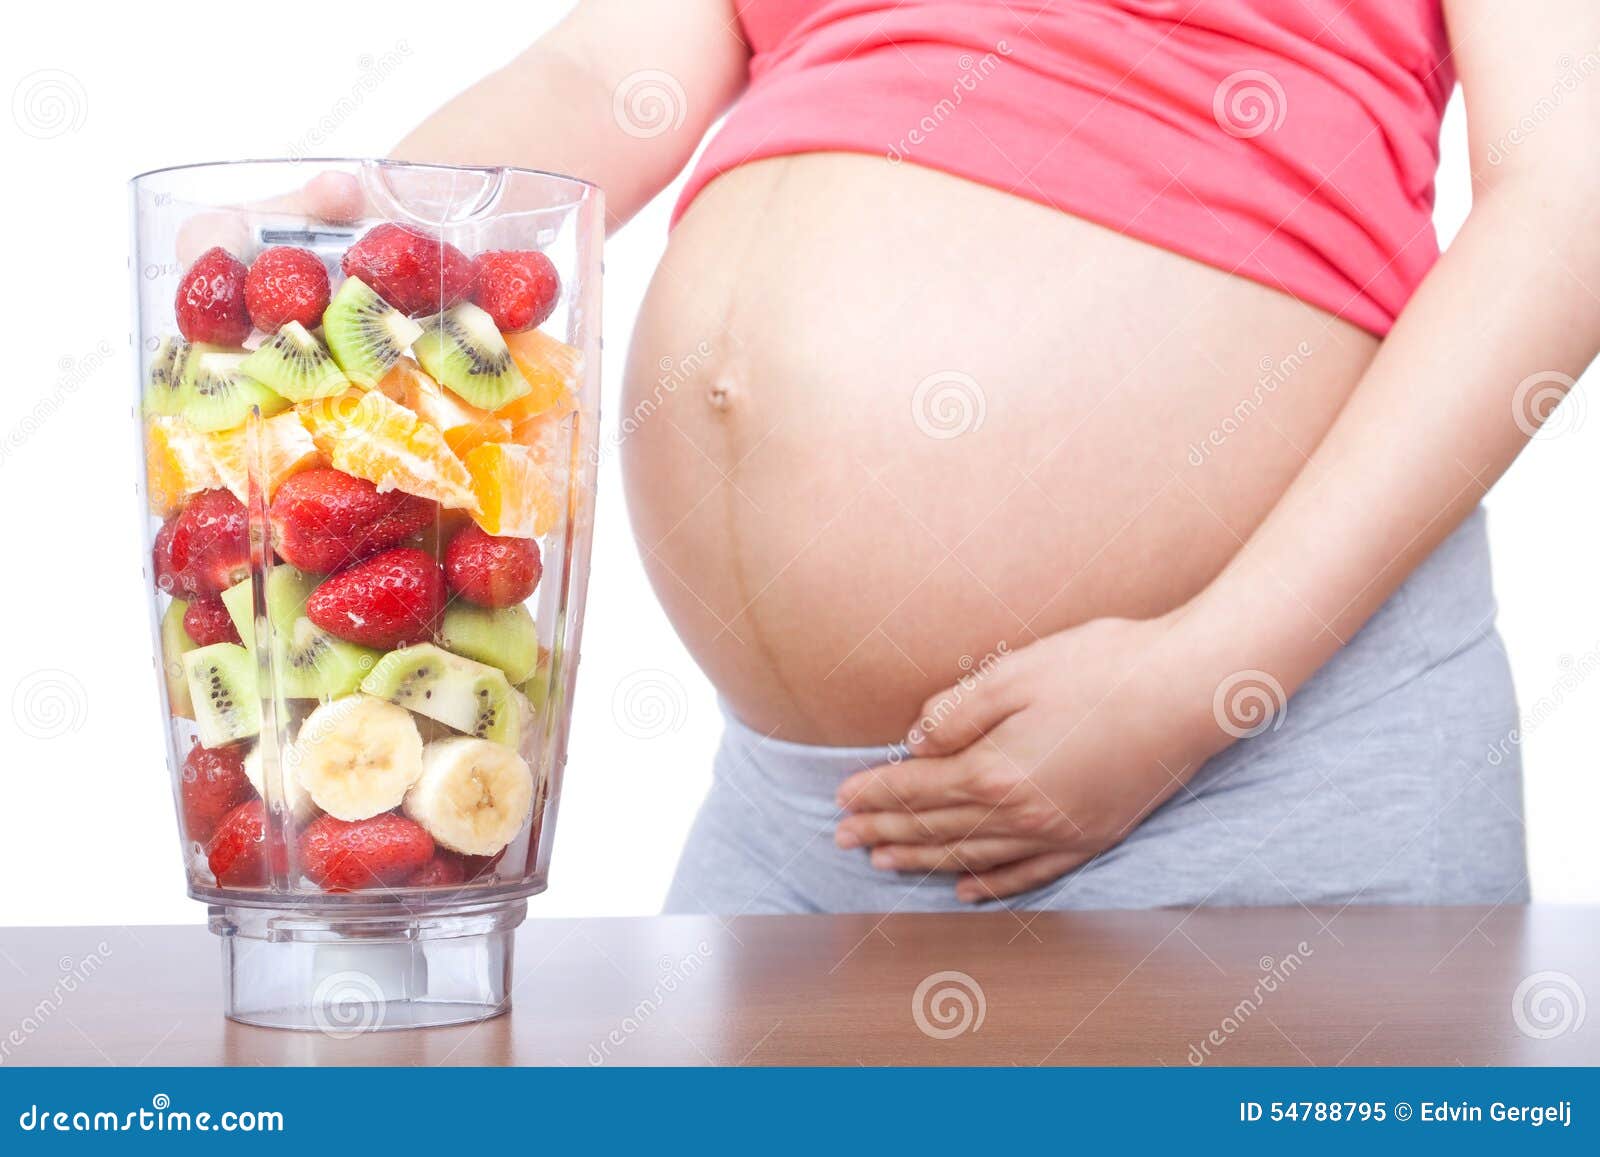 Pregnant Women And Nutrition 19